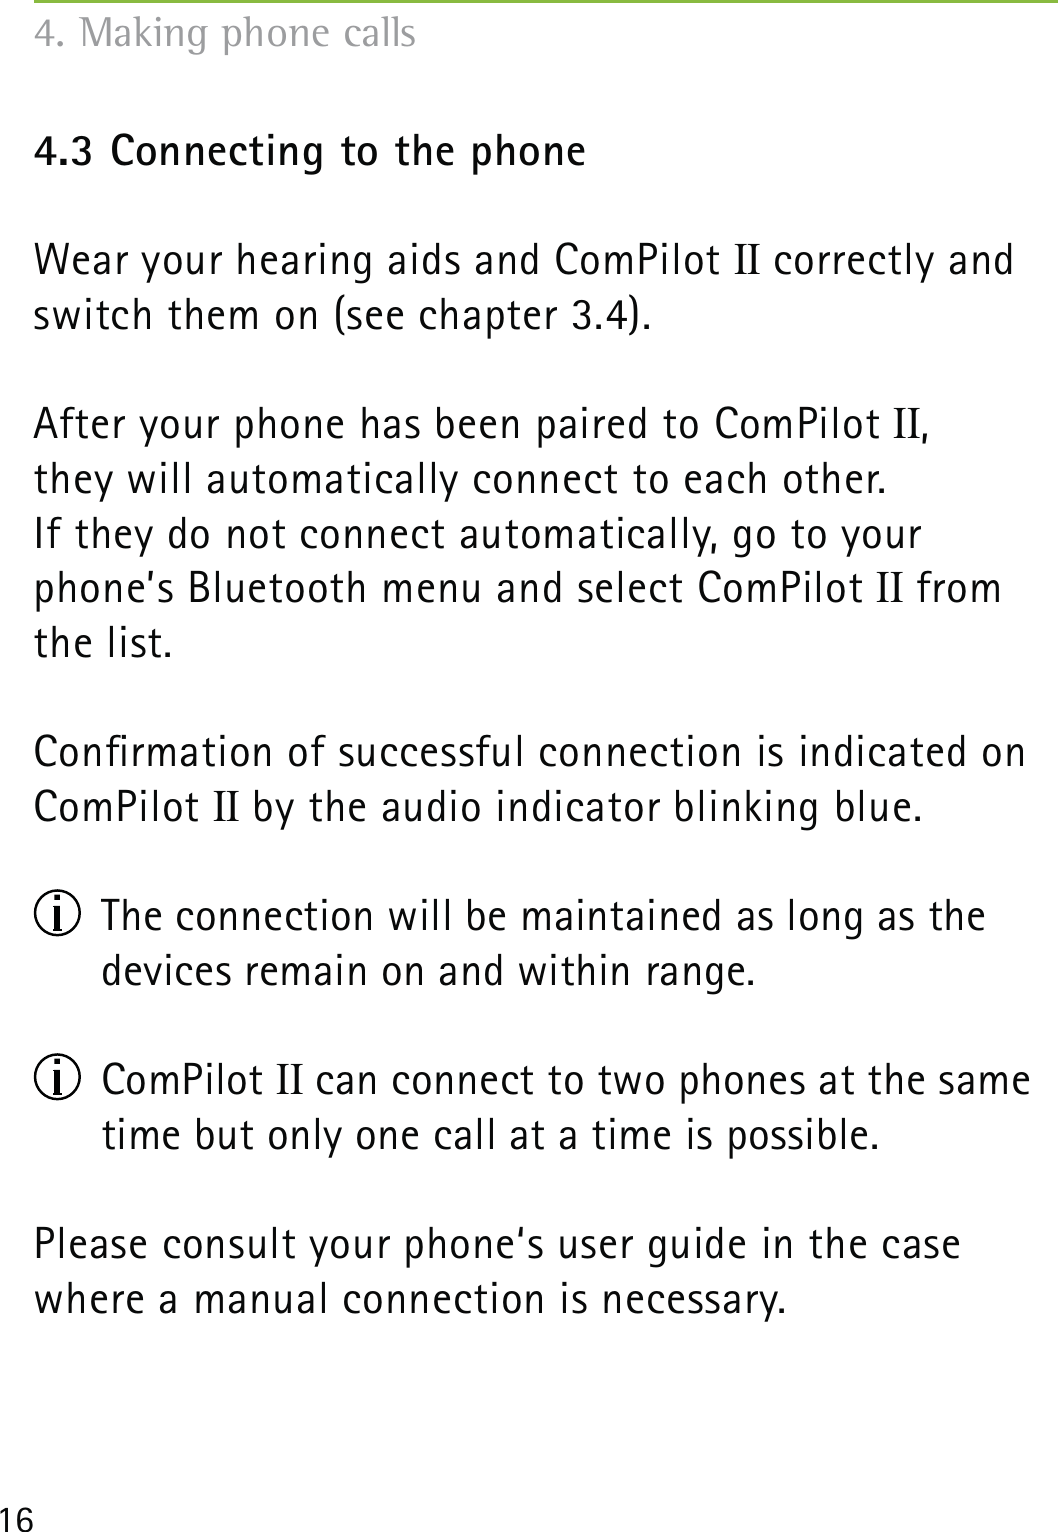 164.3 Connecting to the phoneWear your hearing aids and ComPilot II correctly and switch them on (see chapter 3.4).After your phone has been paired to ComPilot II,  they will automatically connect to each other. If they do not connect automatically, go to your phone’s Bluetooth menu and select ComPilot II from the list.Conrmation of successful connection is indicated on ComPilot II by the audio indicator blinking blue.  The connection will be maintained as long as the devices remain on and within range. ComPilot II can connect to two phones at the same time but only one call at a time is possible.Please consult your phone‘s user guide in the case where a manual connection is necessary.4. Making phone calls